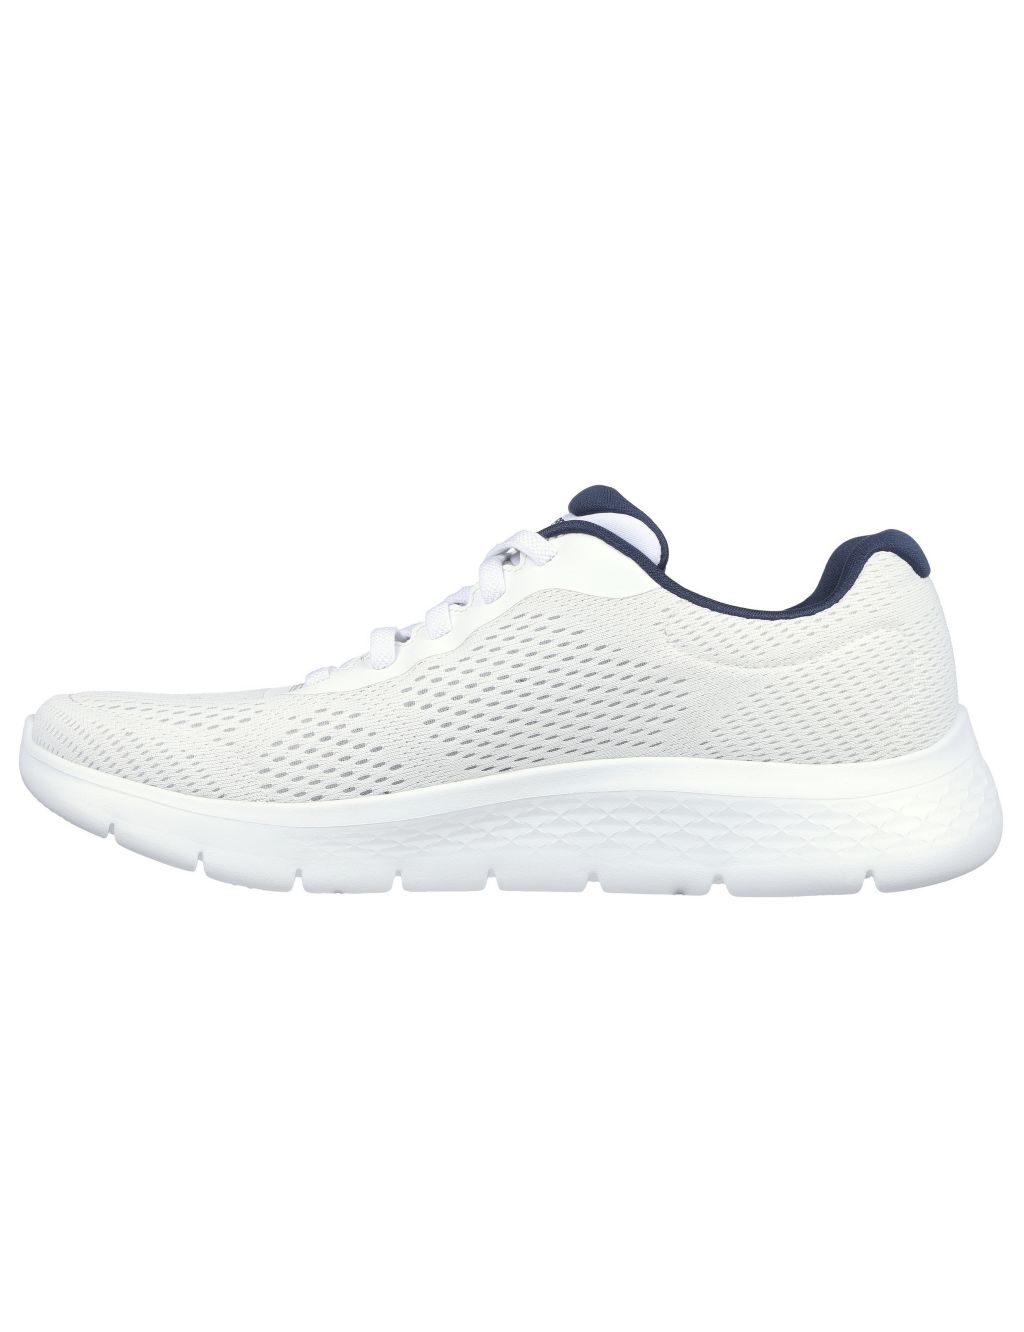 GO WALK Flex Remark Lace Up Trainers image 5